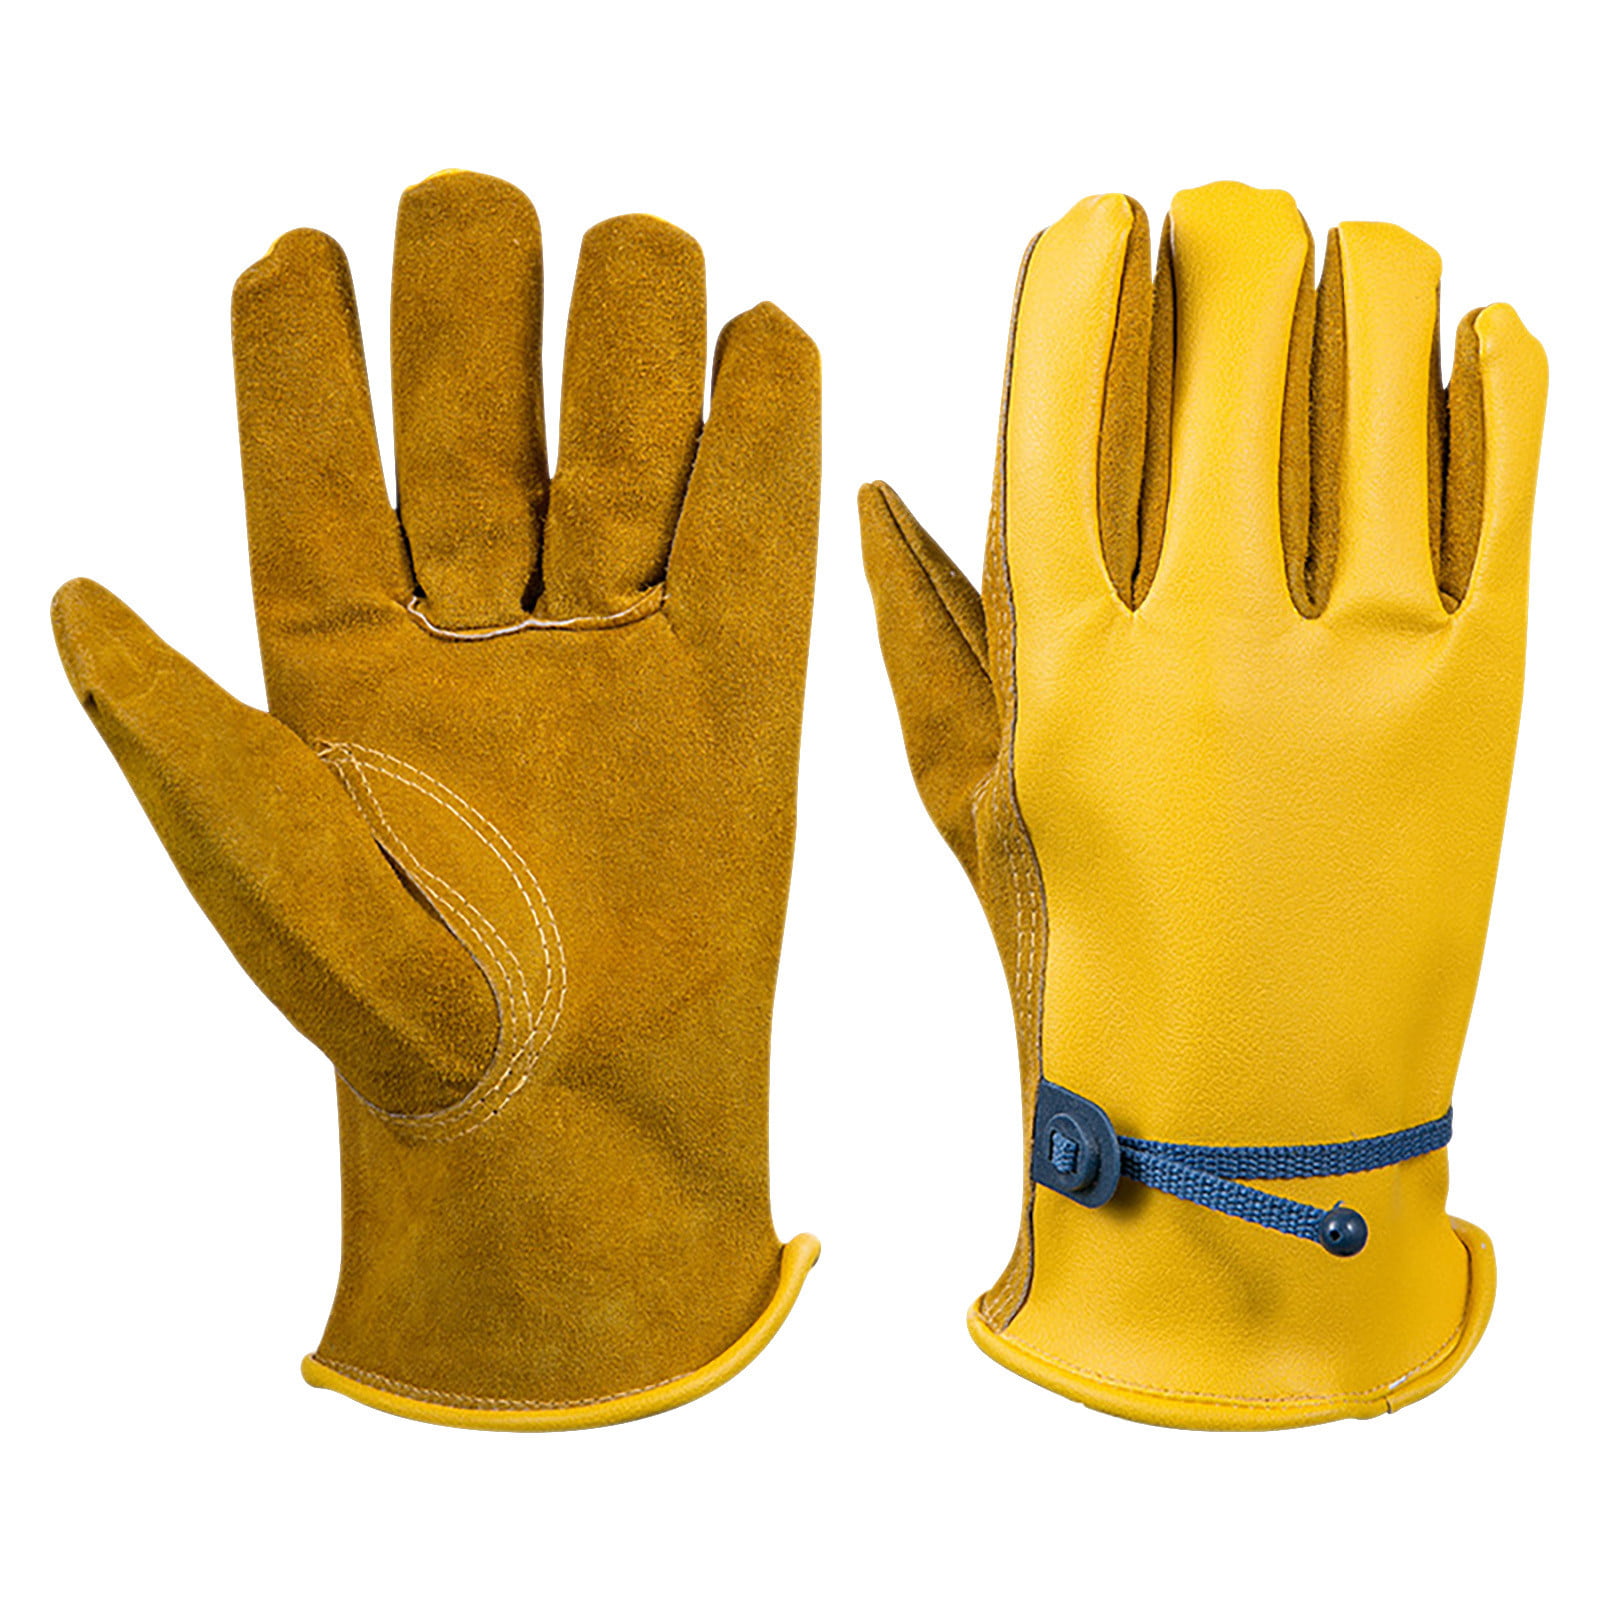 Work Gloves Heavy Duty Safety Mechanic Gardening Builders Cut Hand Protection 